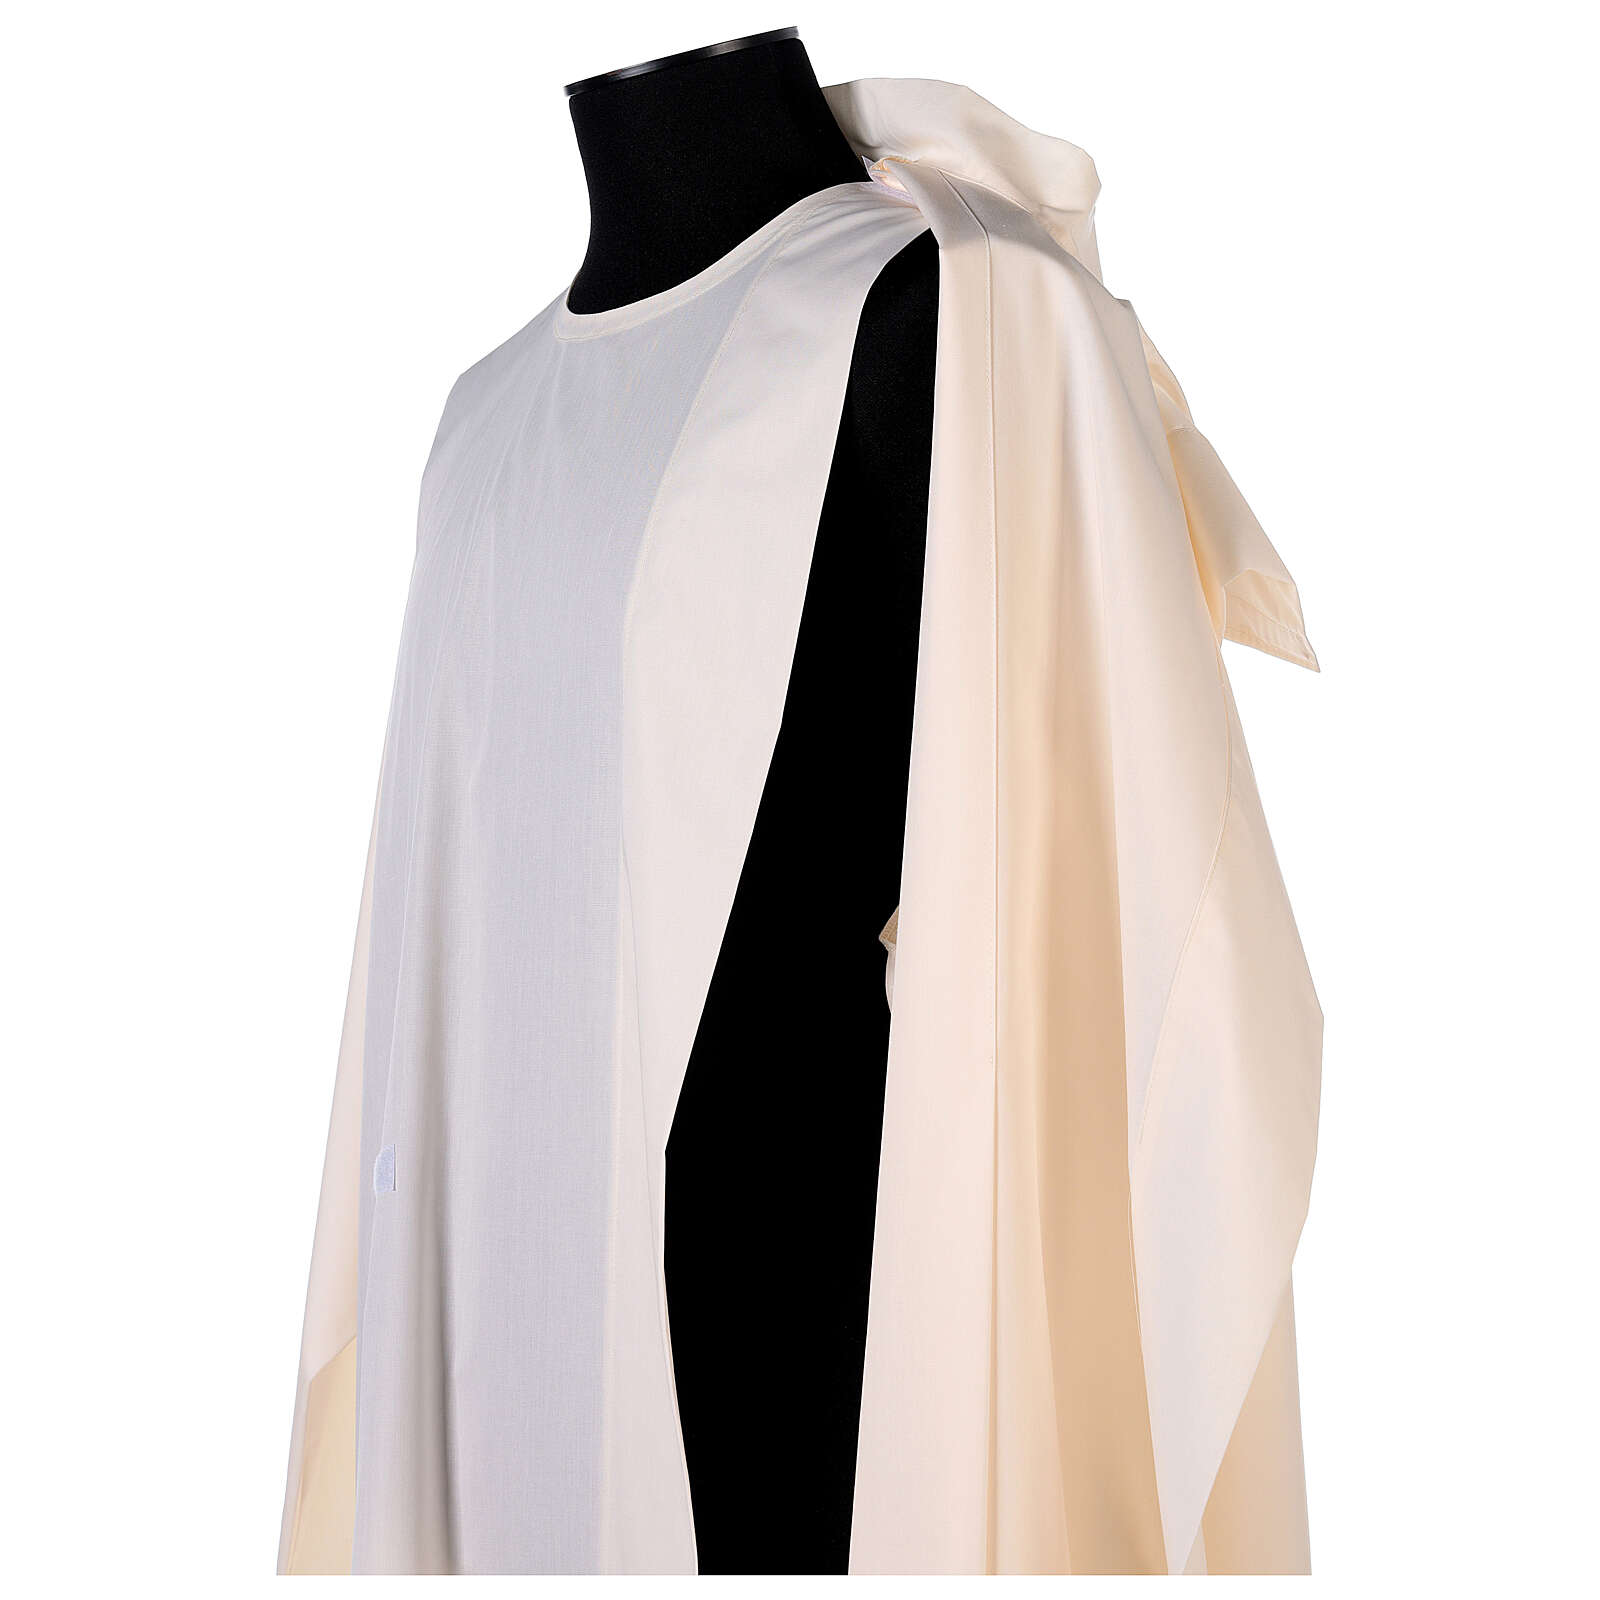 Liturgical alb with velcro | online sales on HOLYART.co.uk